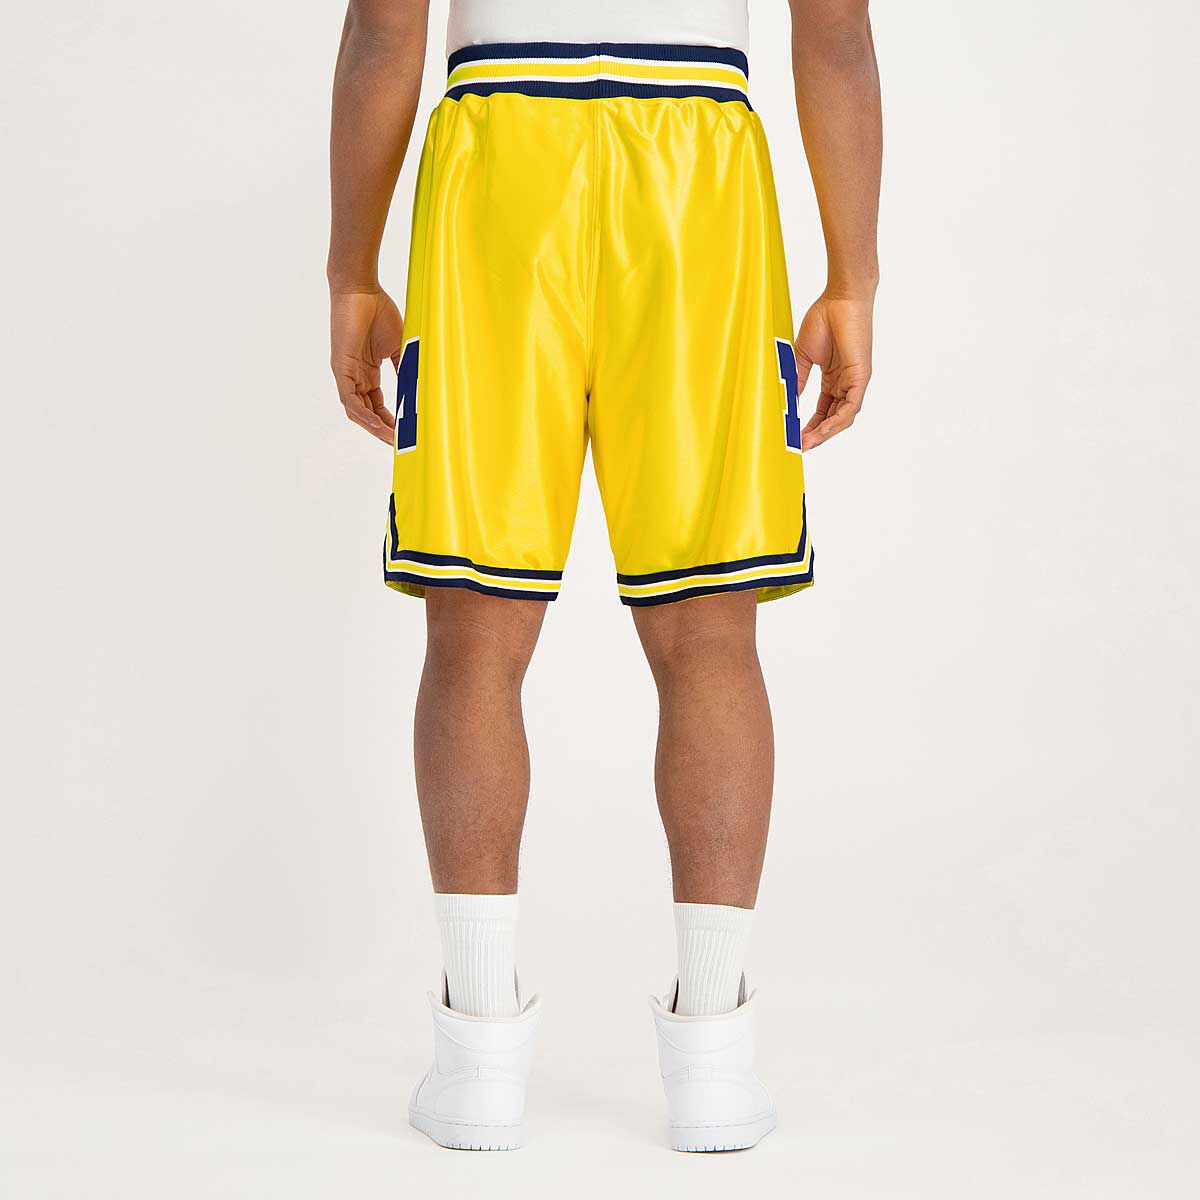 Buy NCAA MICHIGAN WOLVERINES 1991 AUTHENTIC SHORTS for N/A 0.0 on KICKZ ...